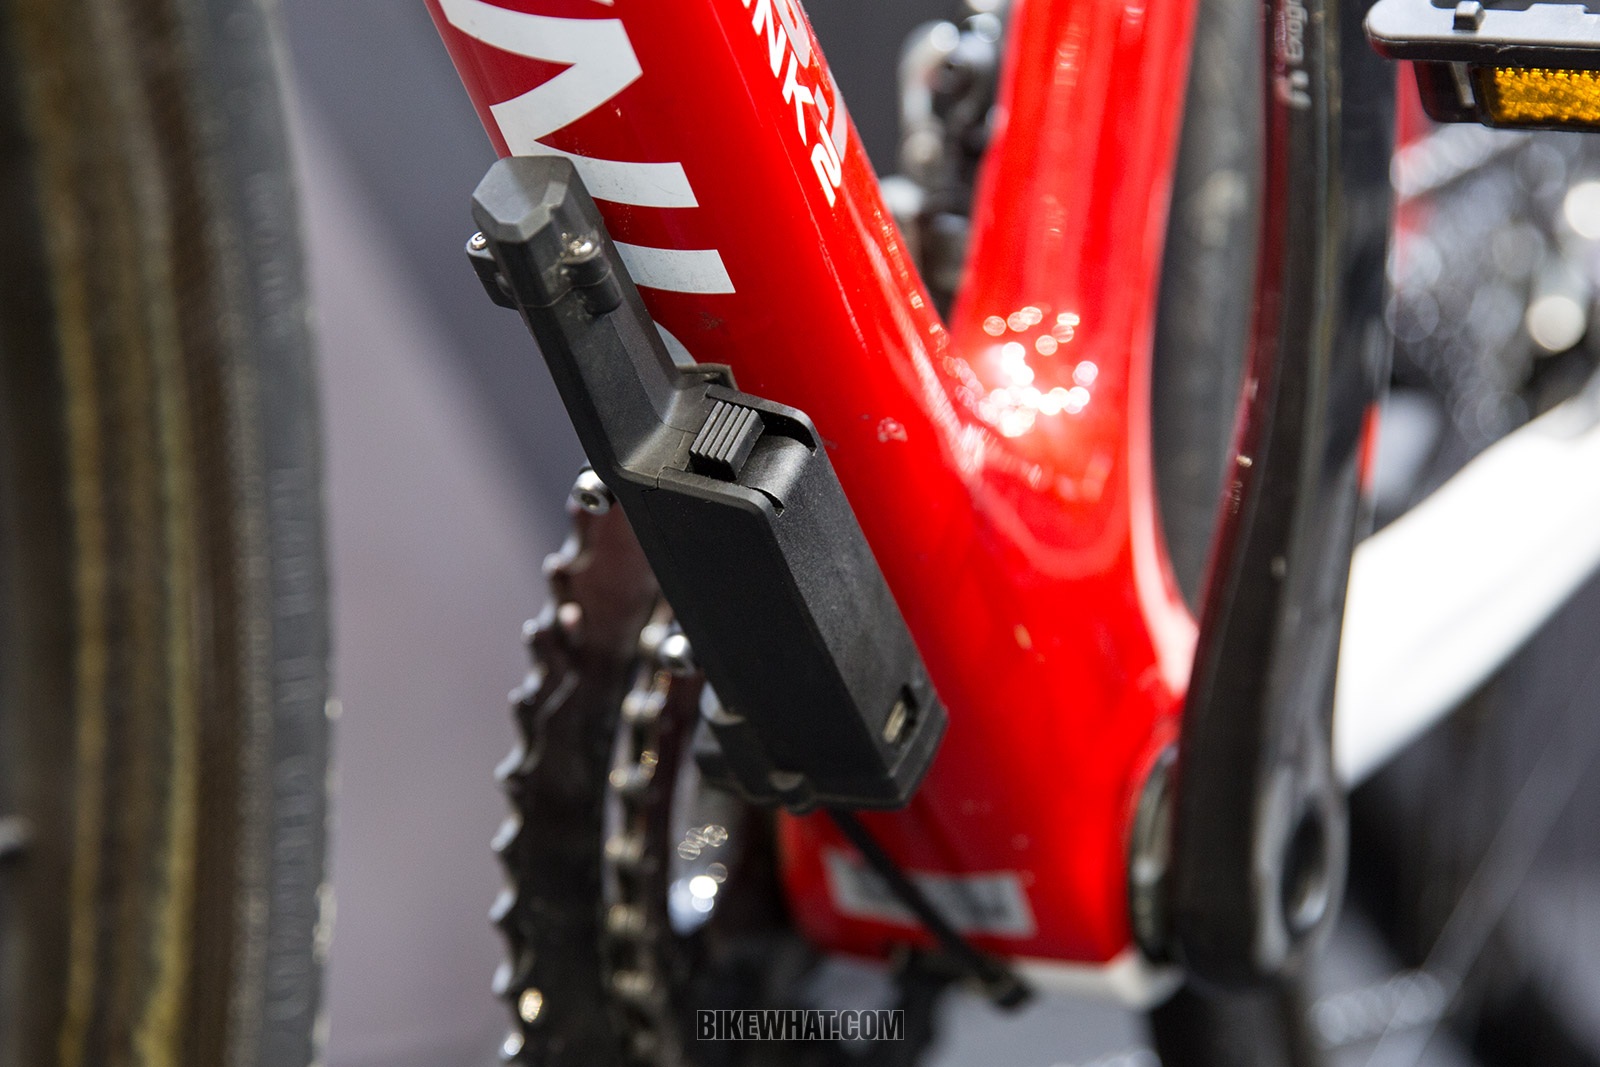 Feature_TaipeiCycle_2019_Xshifter_3.jpg